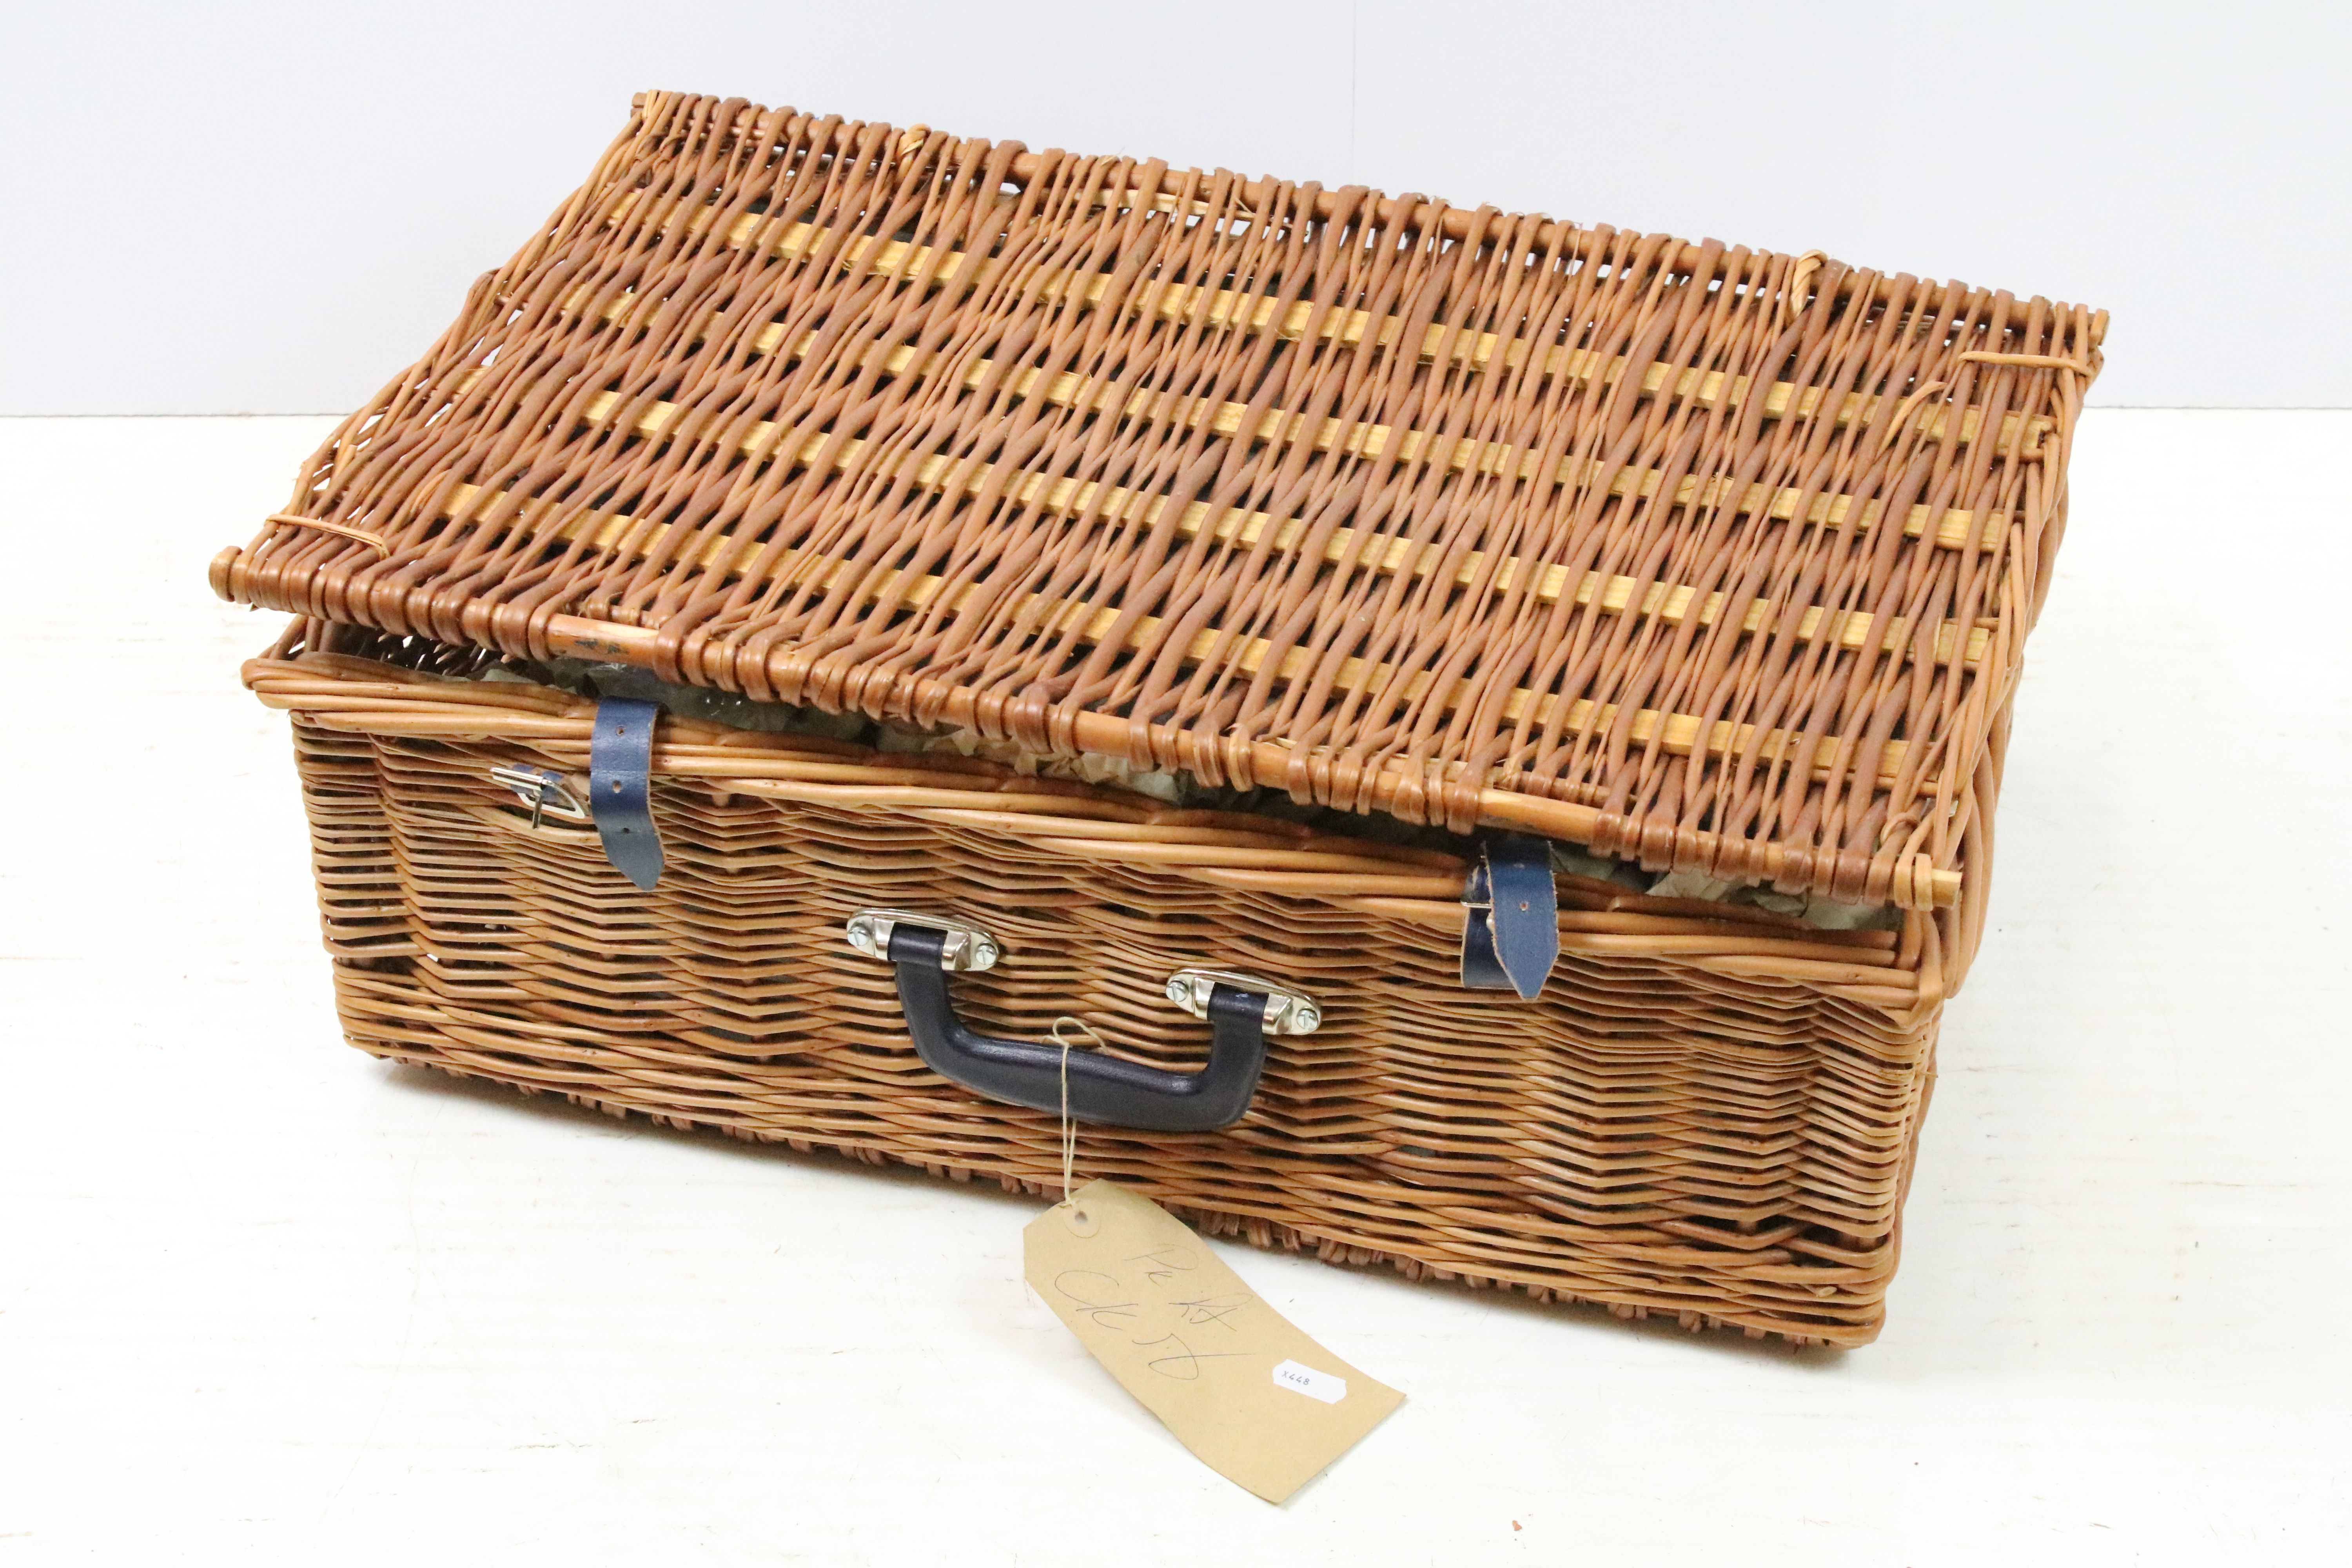 Wicker picnic hamper containing a four piece place setting - Image 8 of 8